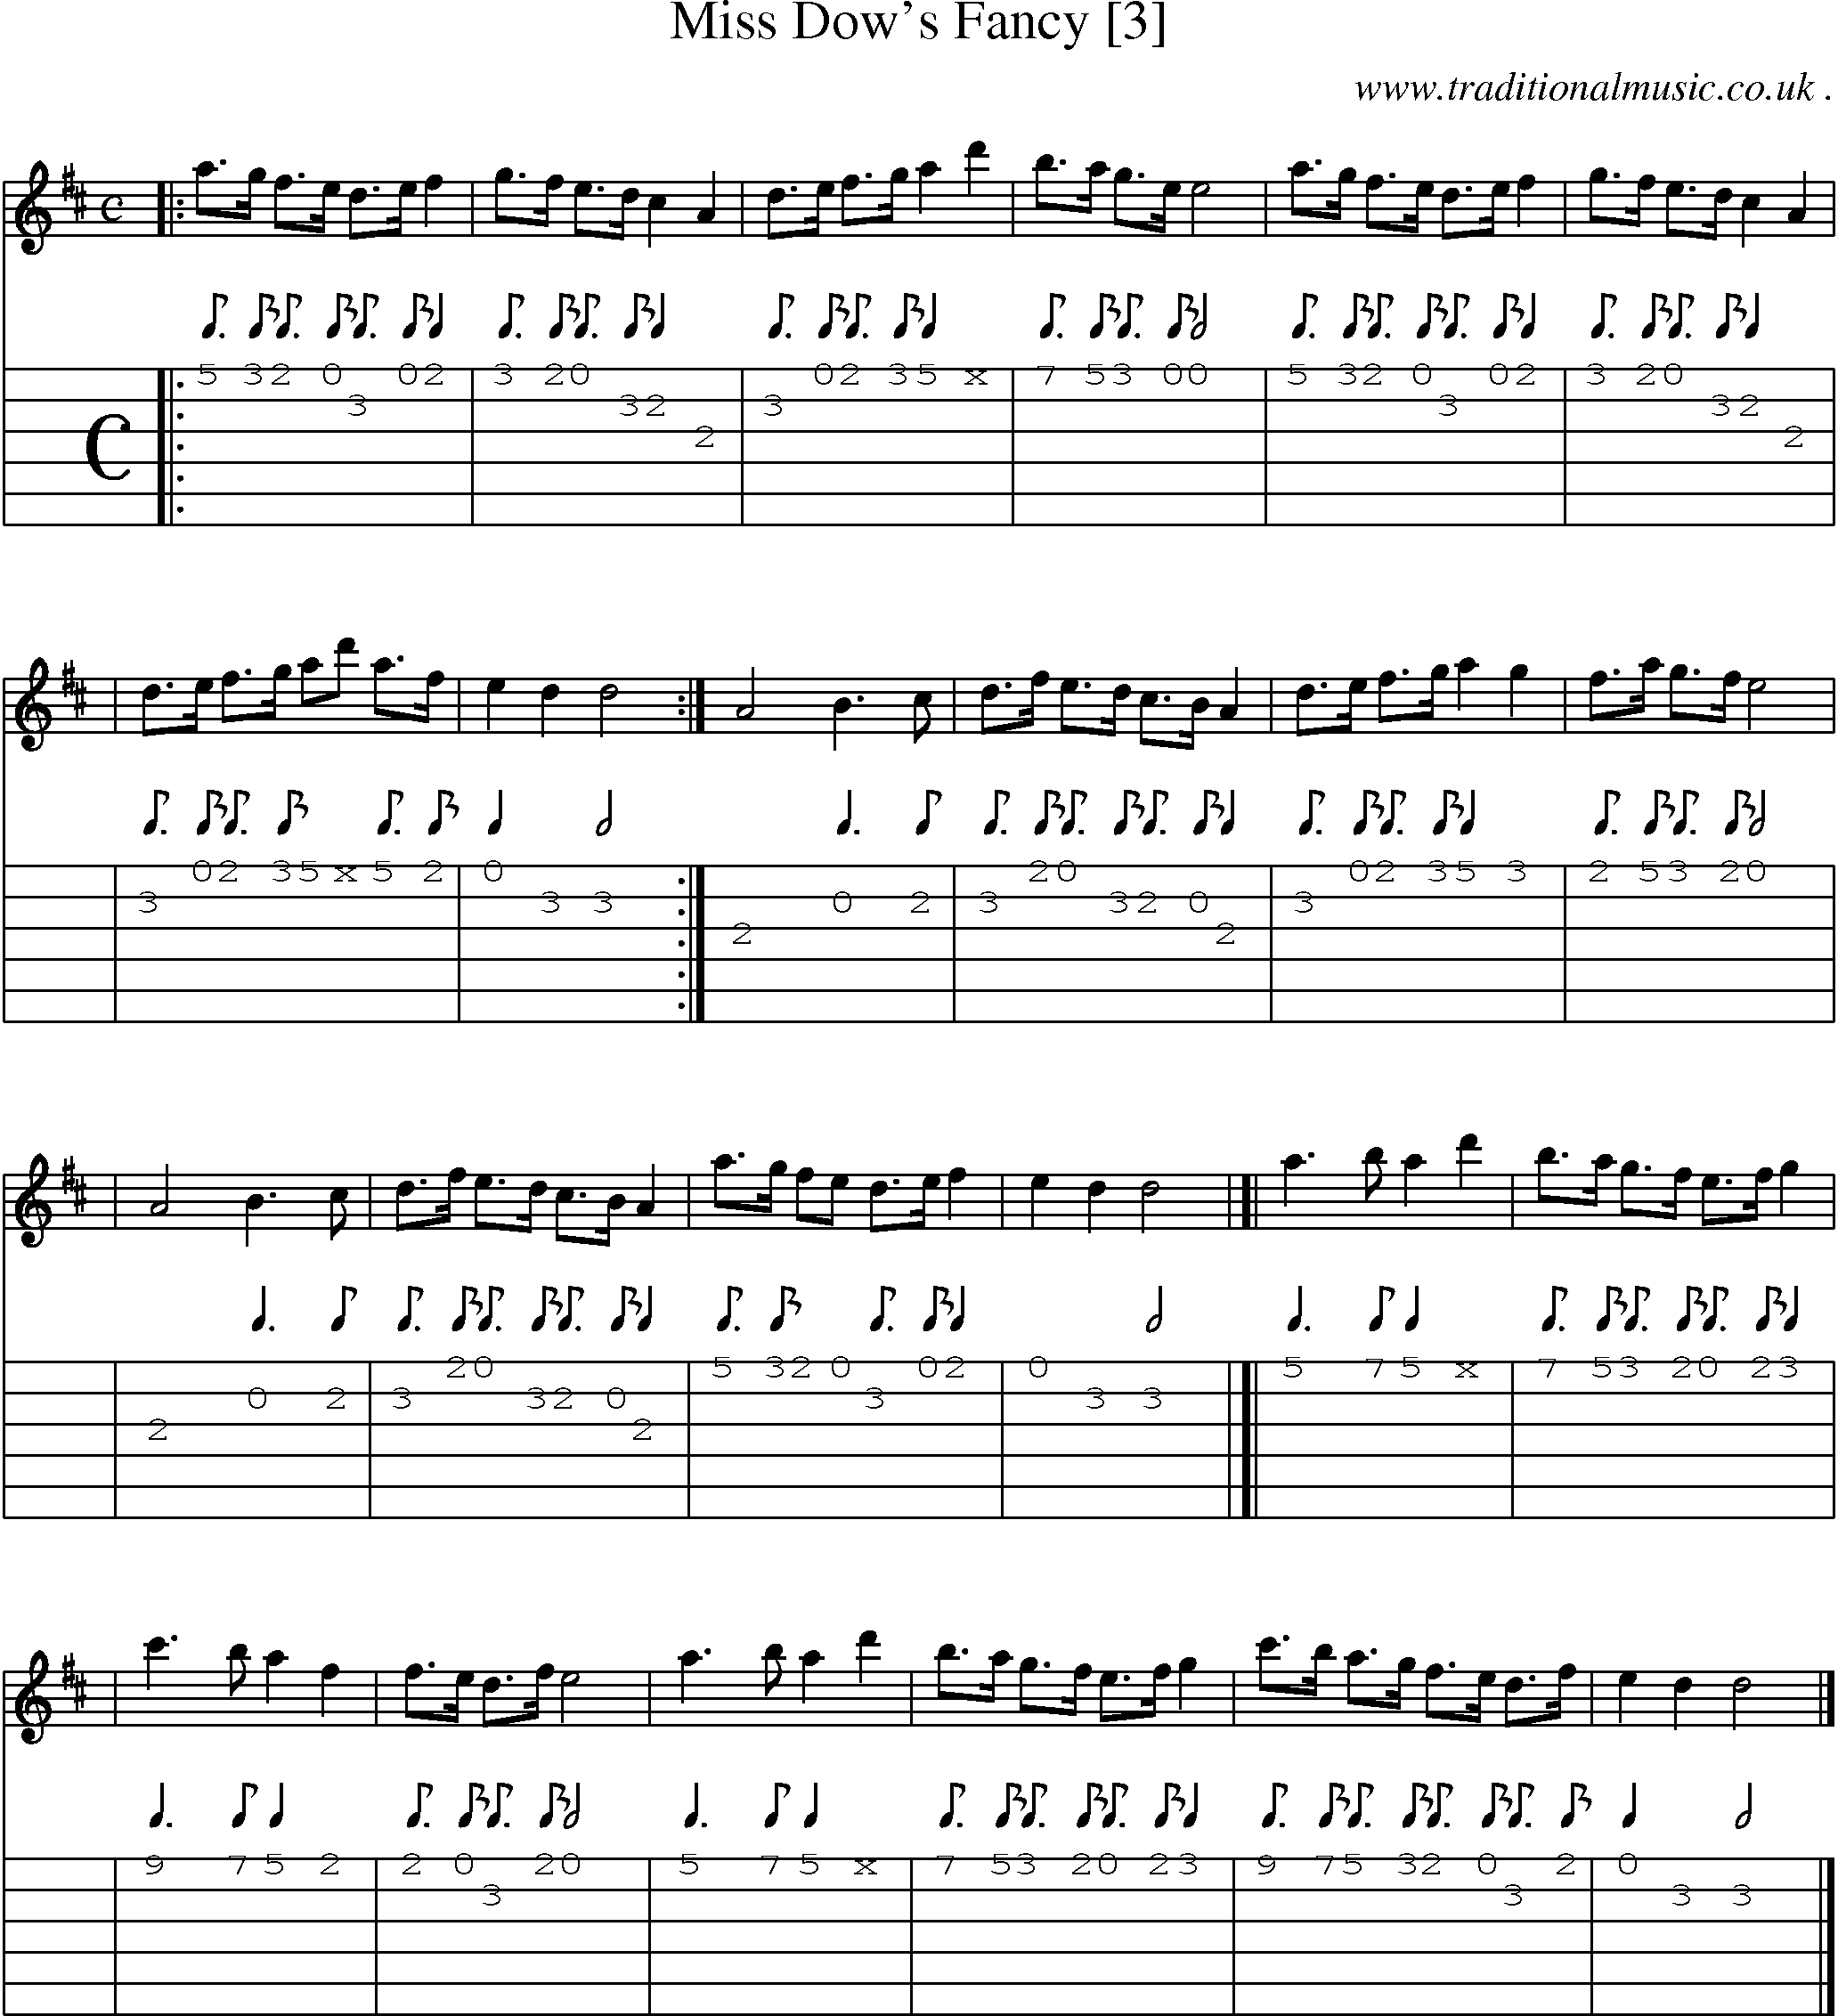 Sheet-music  score, Chords and Guitar Tabs for Miss Dows Fancy [3]